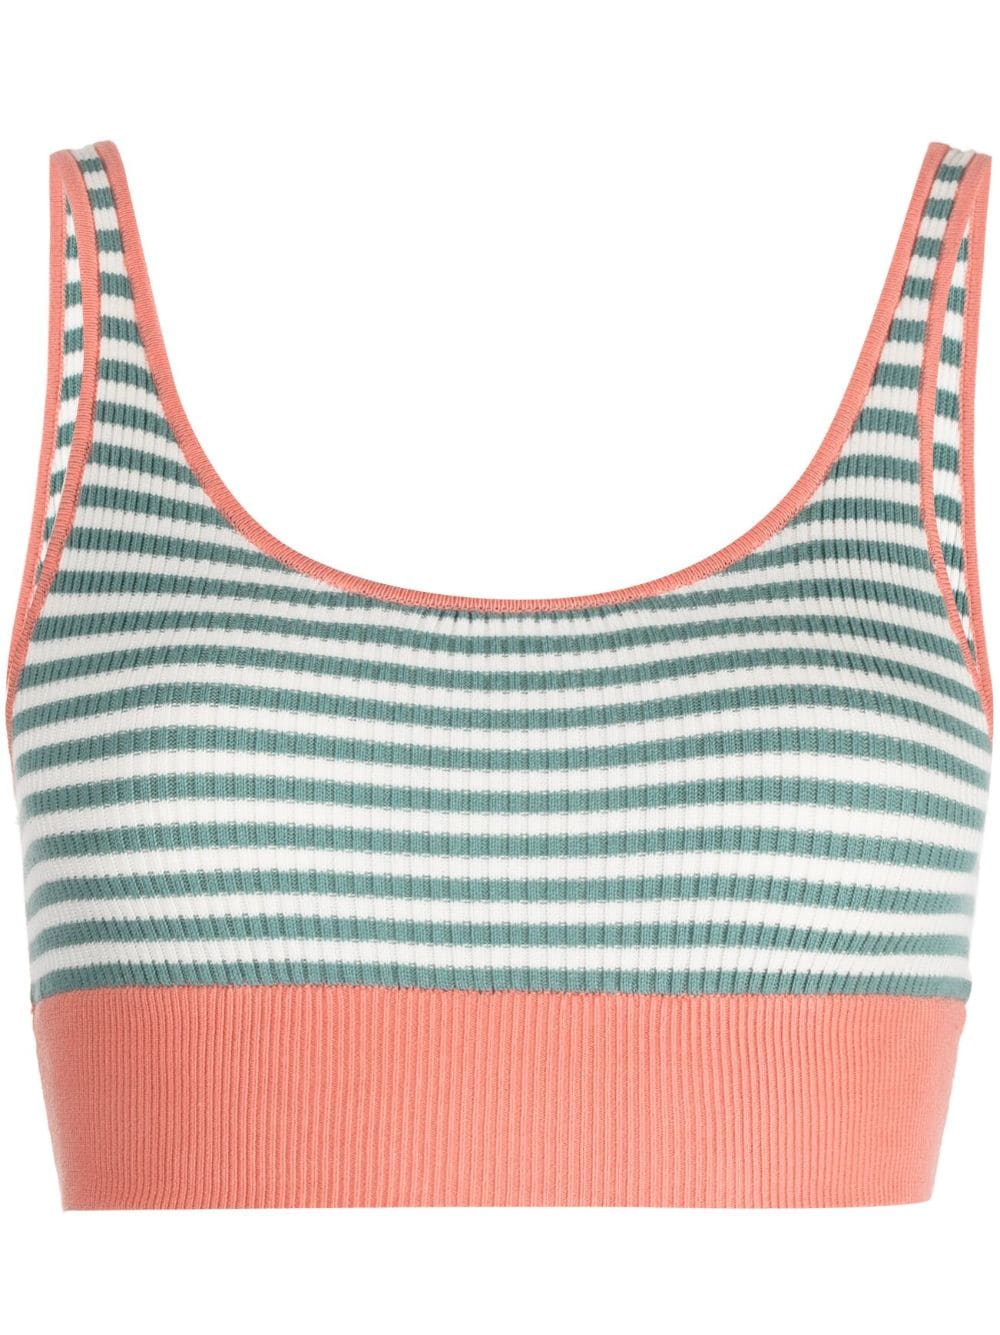 THE UPSIDE SAYULITA KNITTED STRIPED CROP TOP